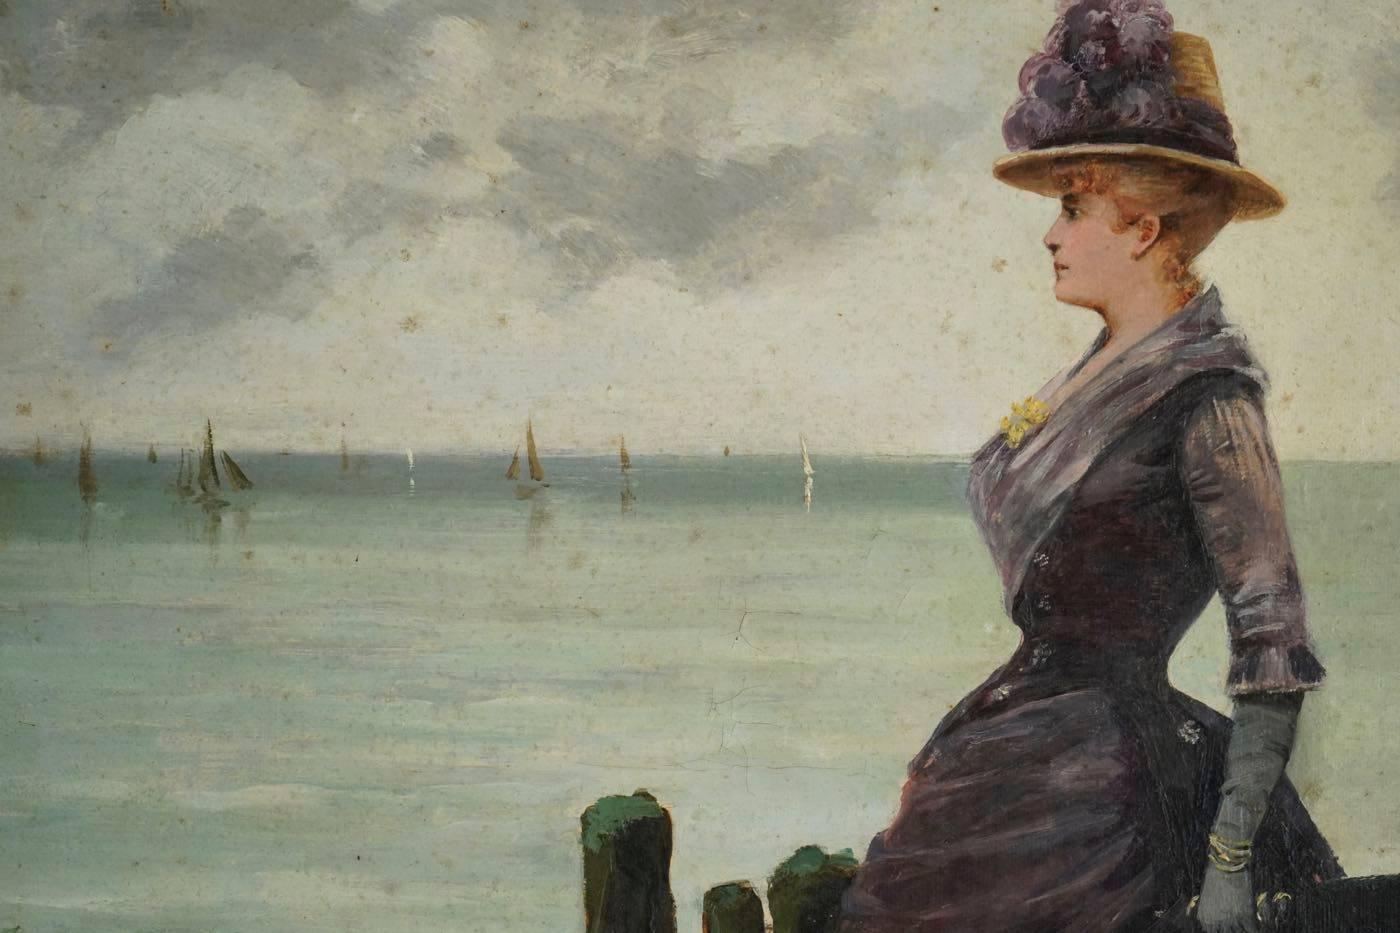 Romantic Oil on Canvas Painting by Leon Breton, “Elegant Woman at the Ocean Side”